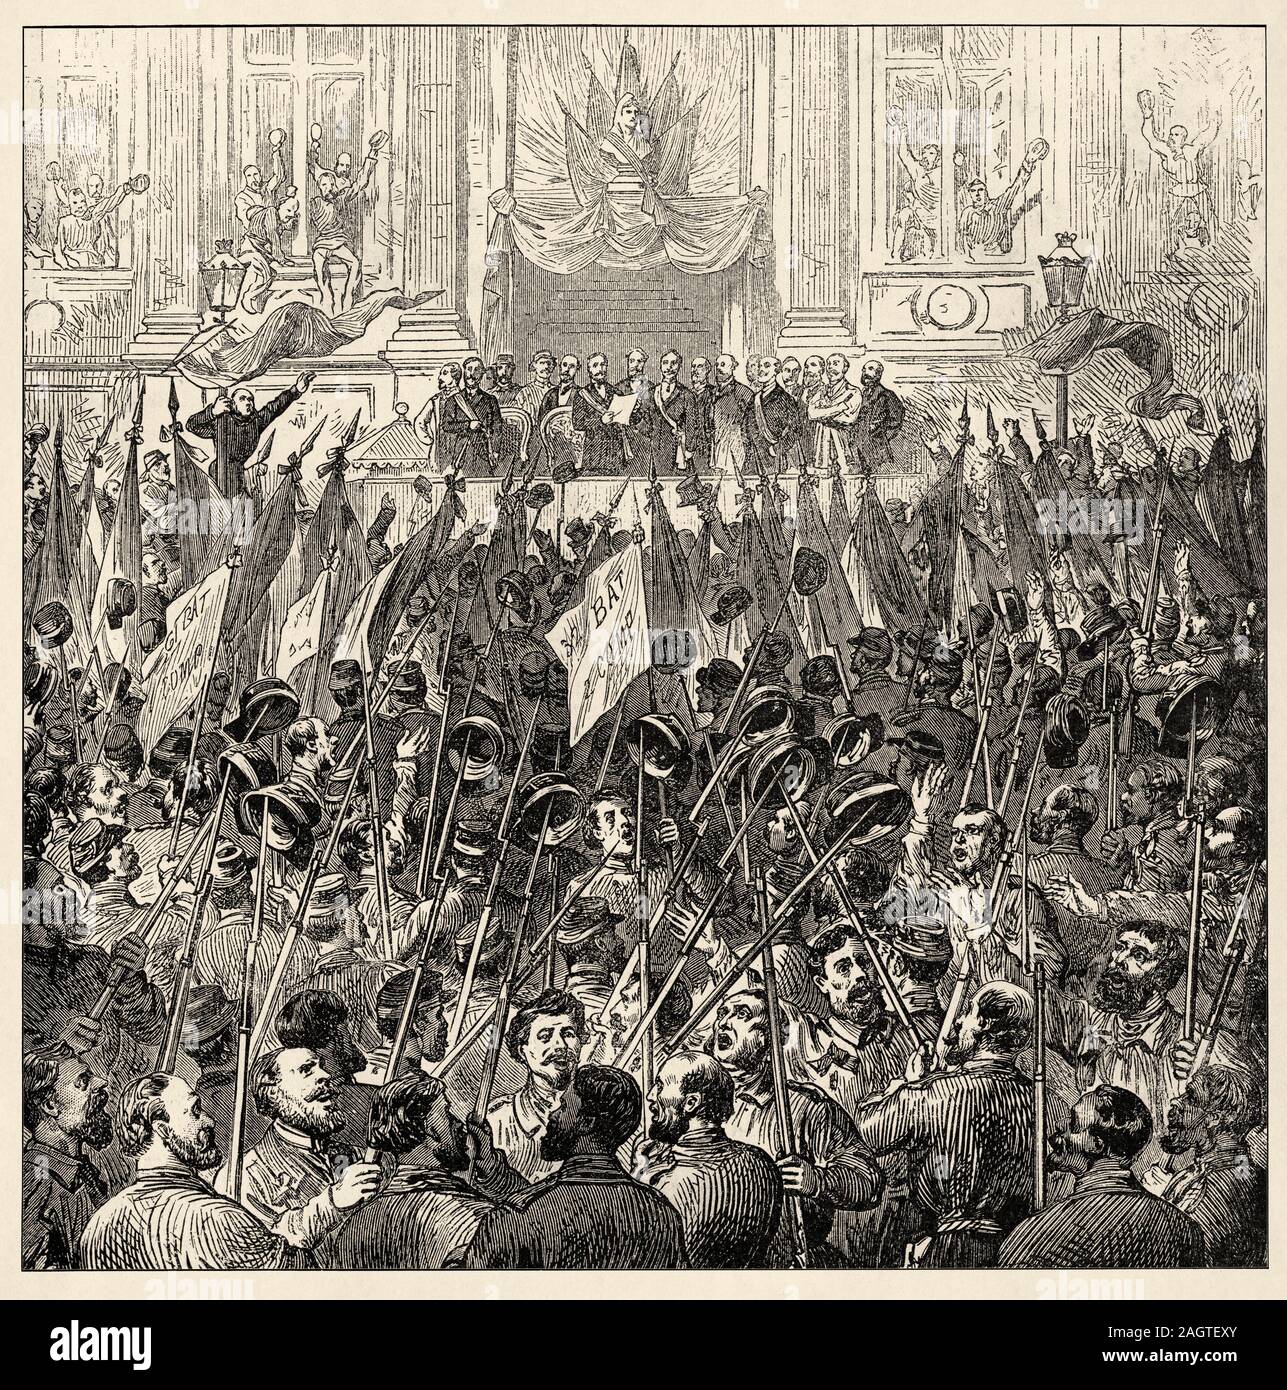 Proclamation of the commune at the town hall March 26, 1871. The Paris Commune is an insurrectionary period in the history of Paris, from March 18, 18 Stock Photo